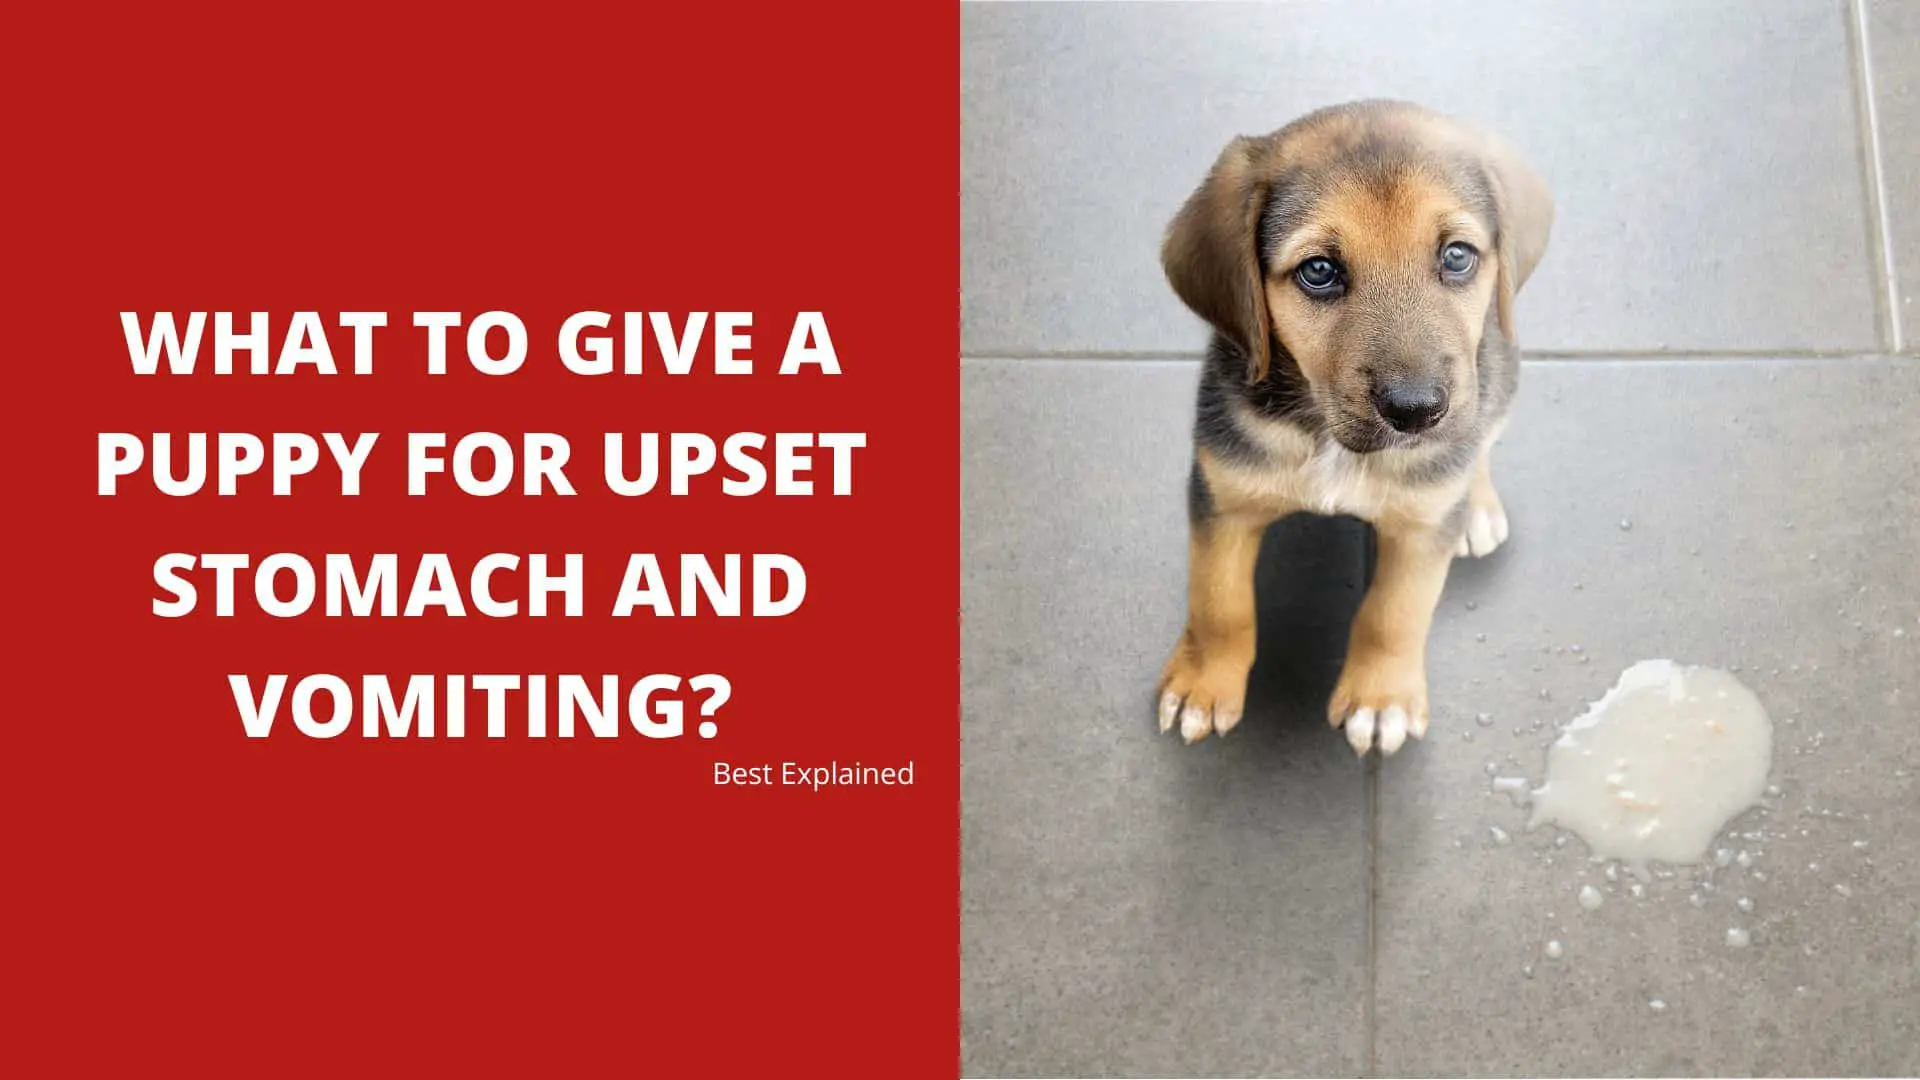 What to Give a Puppy for Upset Stomach and Vomiting? Best Explained 2022